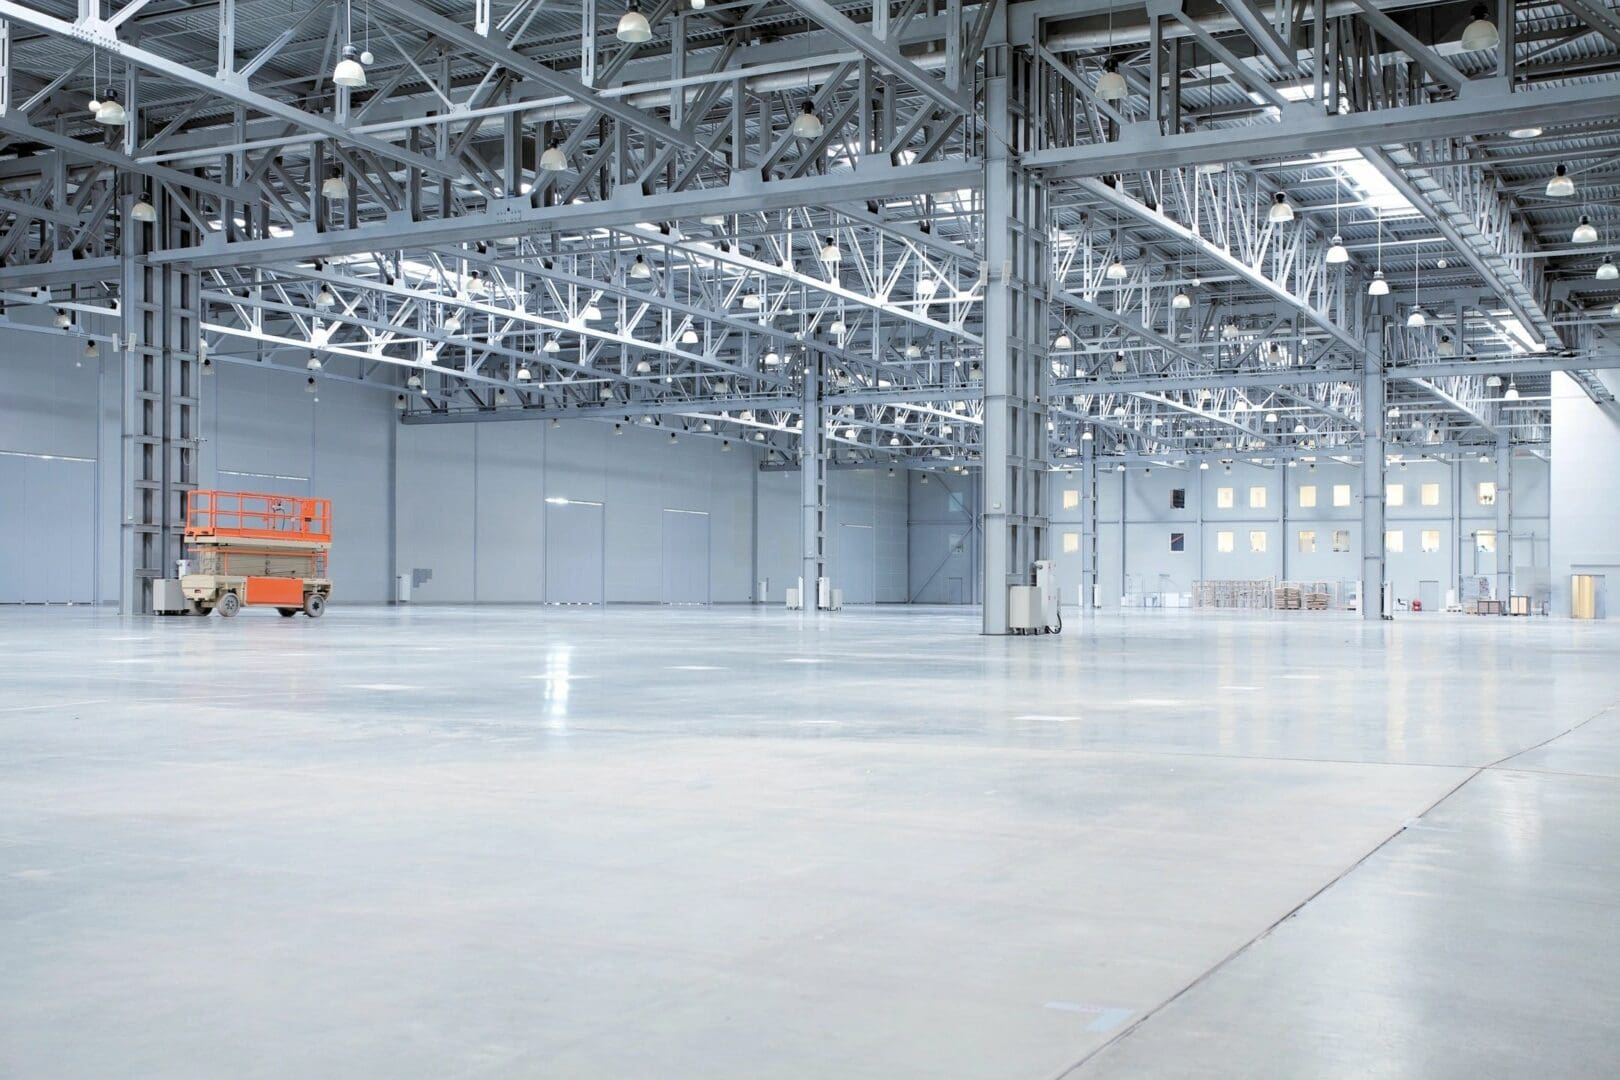 A large warehouse with many lights and a forklift.